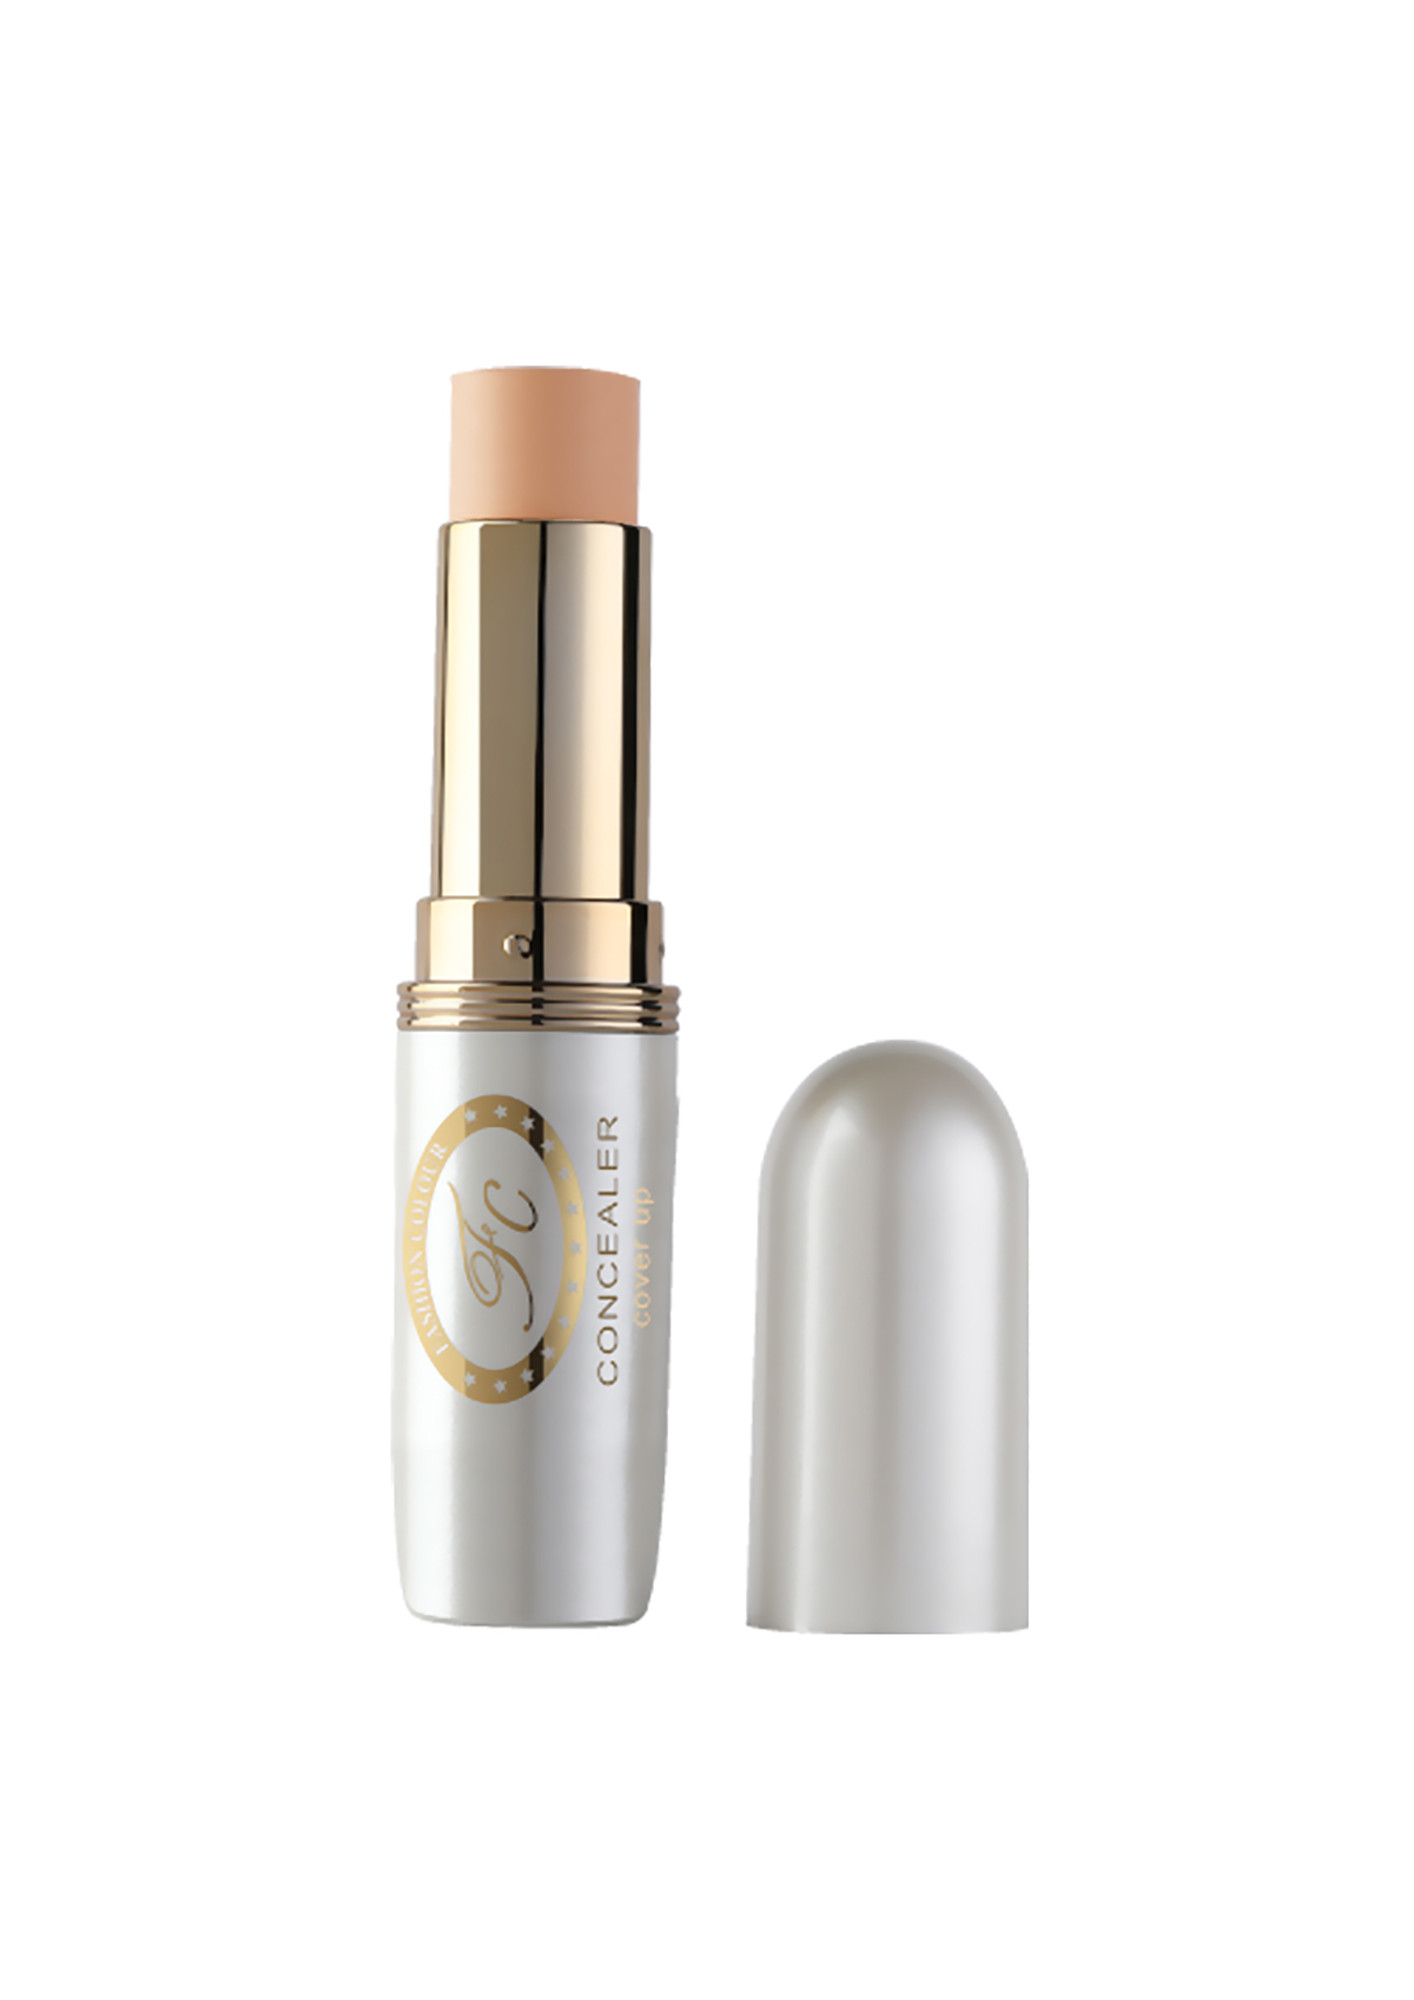 COVER UP CONCEALER STICK, SHADE 02